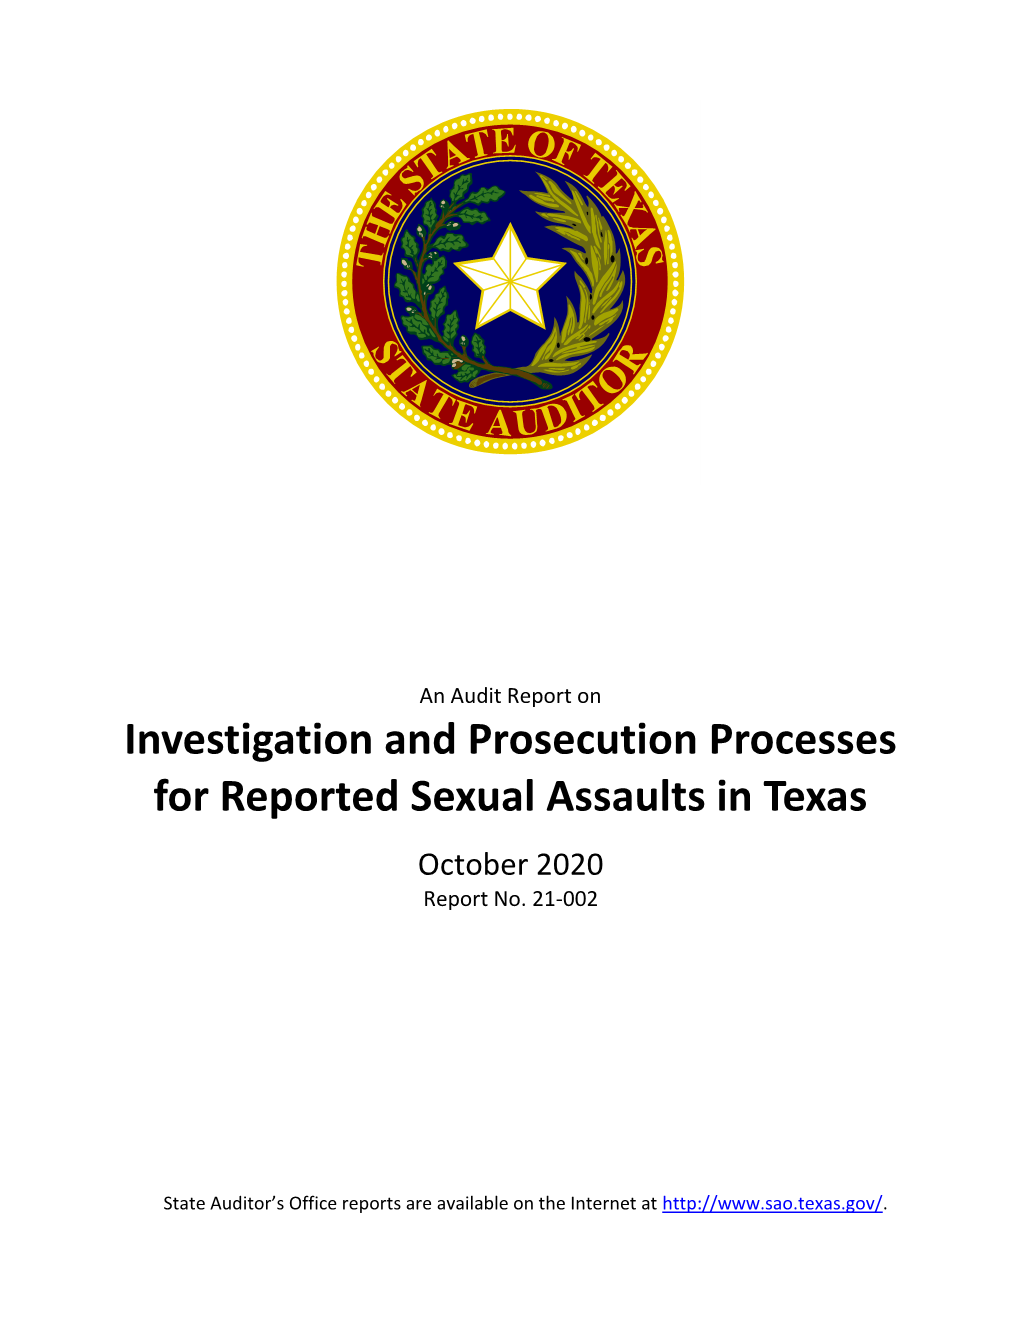 An Audit Report on Investigation and Prosecution Processes for Reported Sexual Assaults in Texas October 2020 Report No